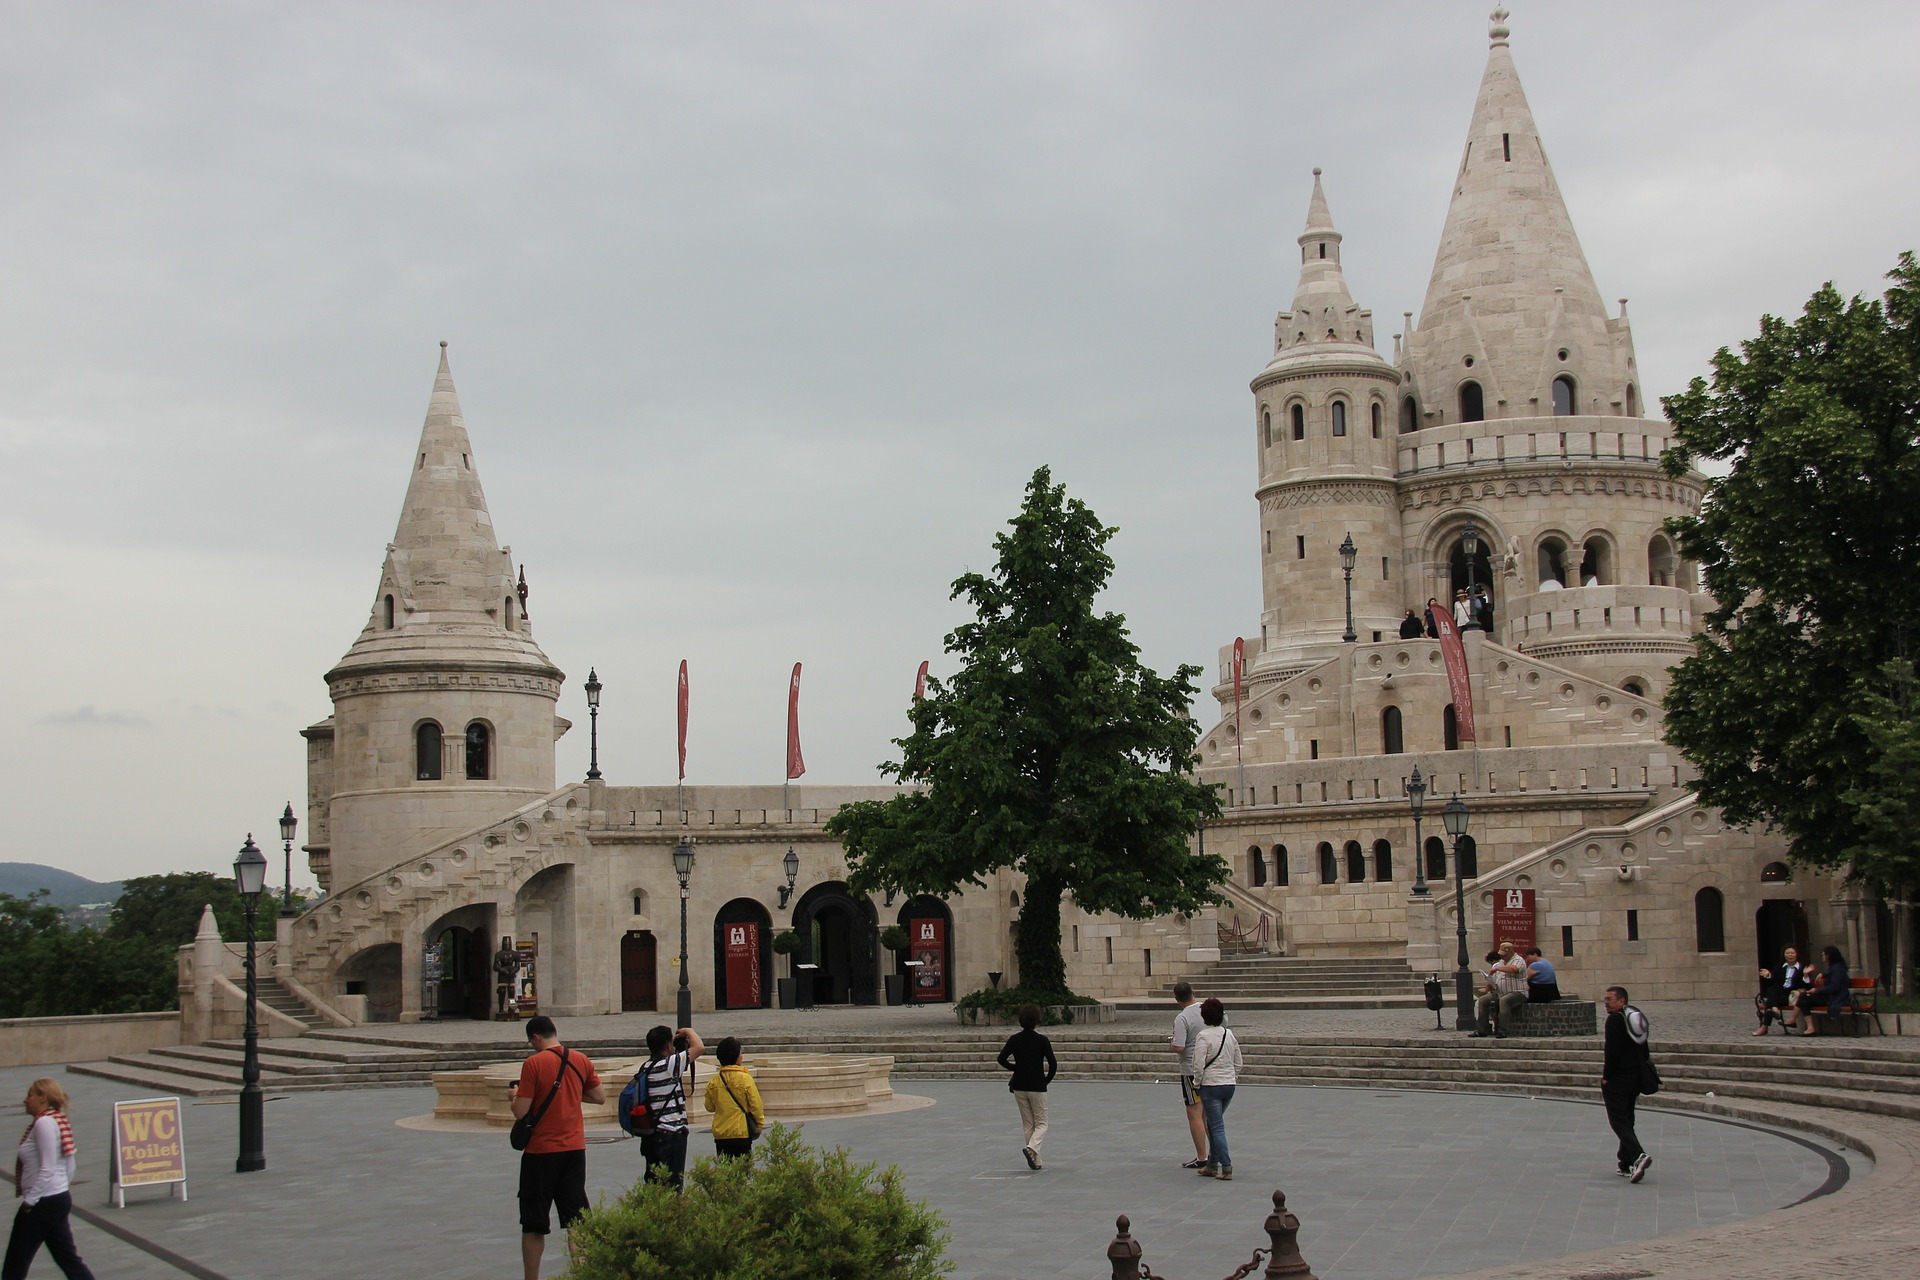 Fisherman’s Bastion in Budapest, Hungary